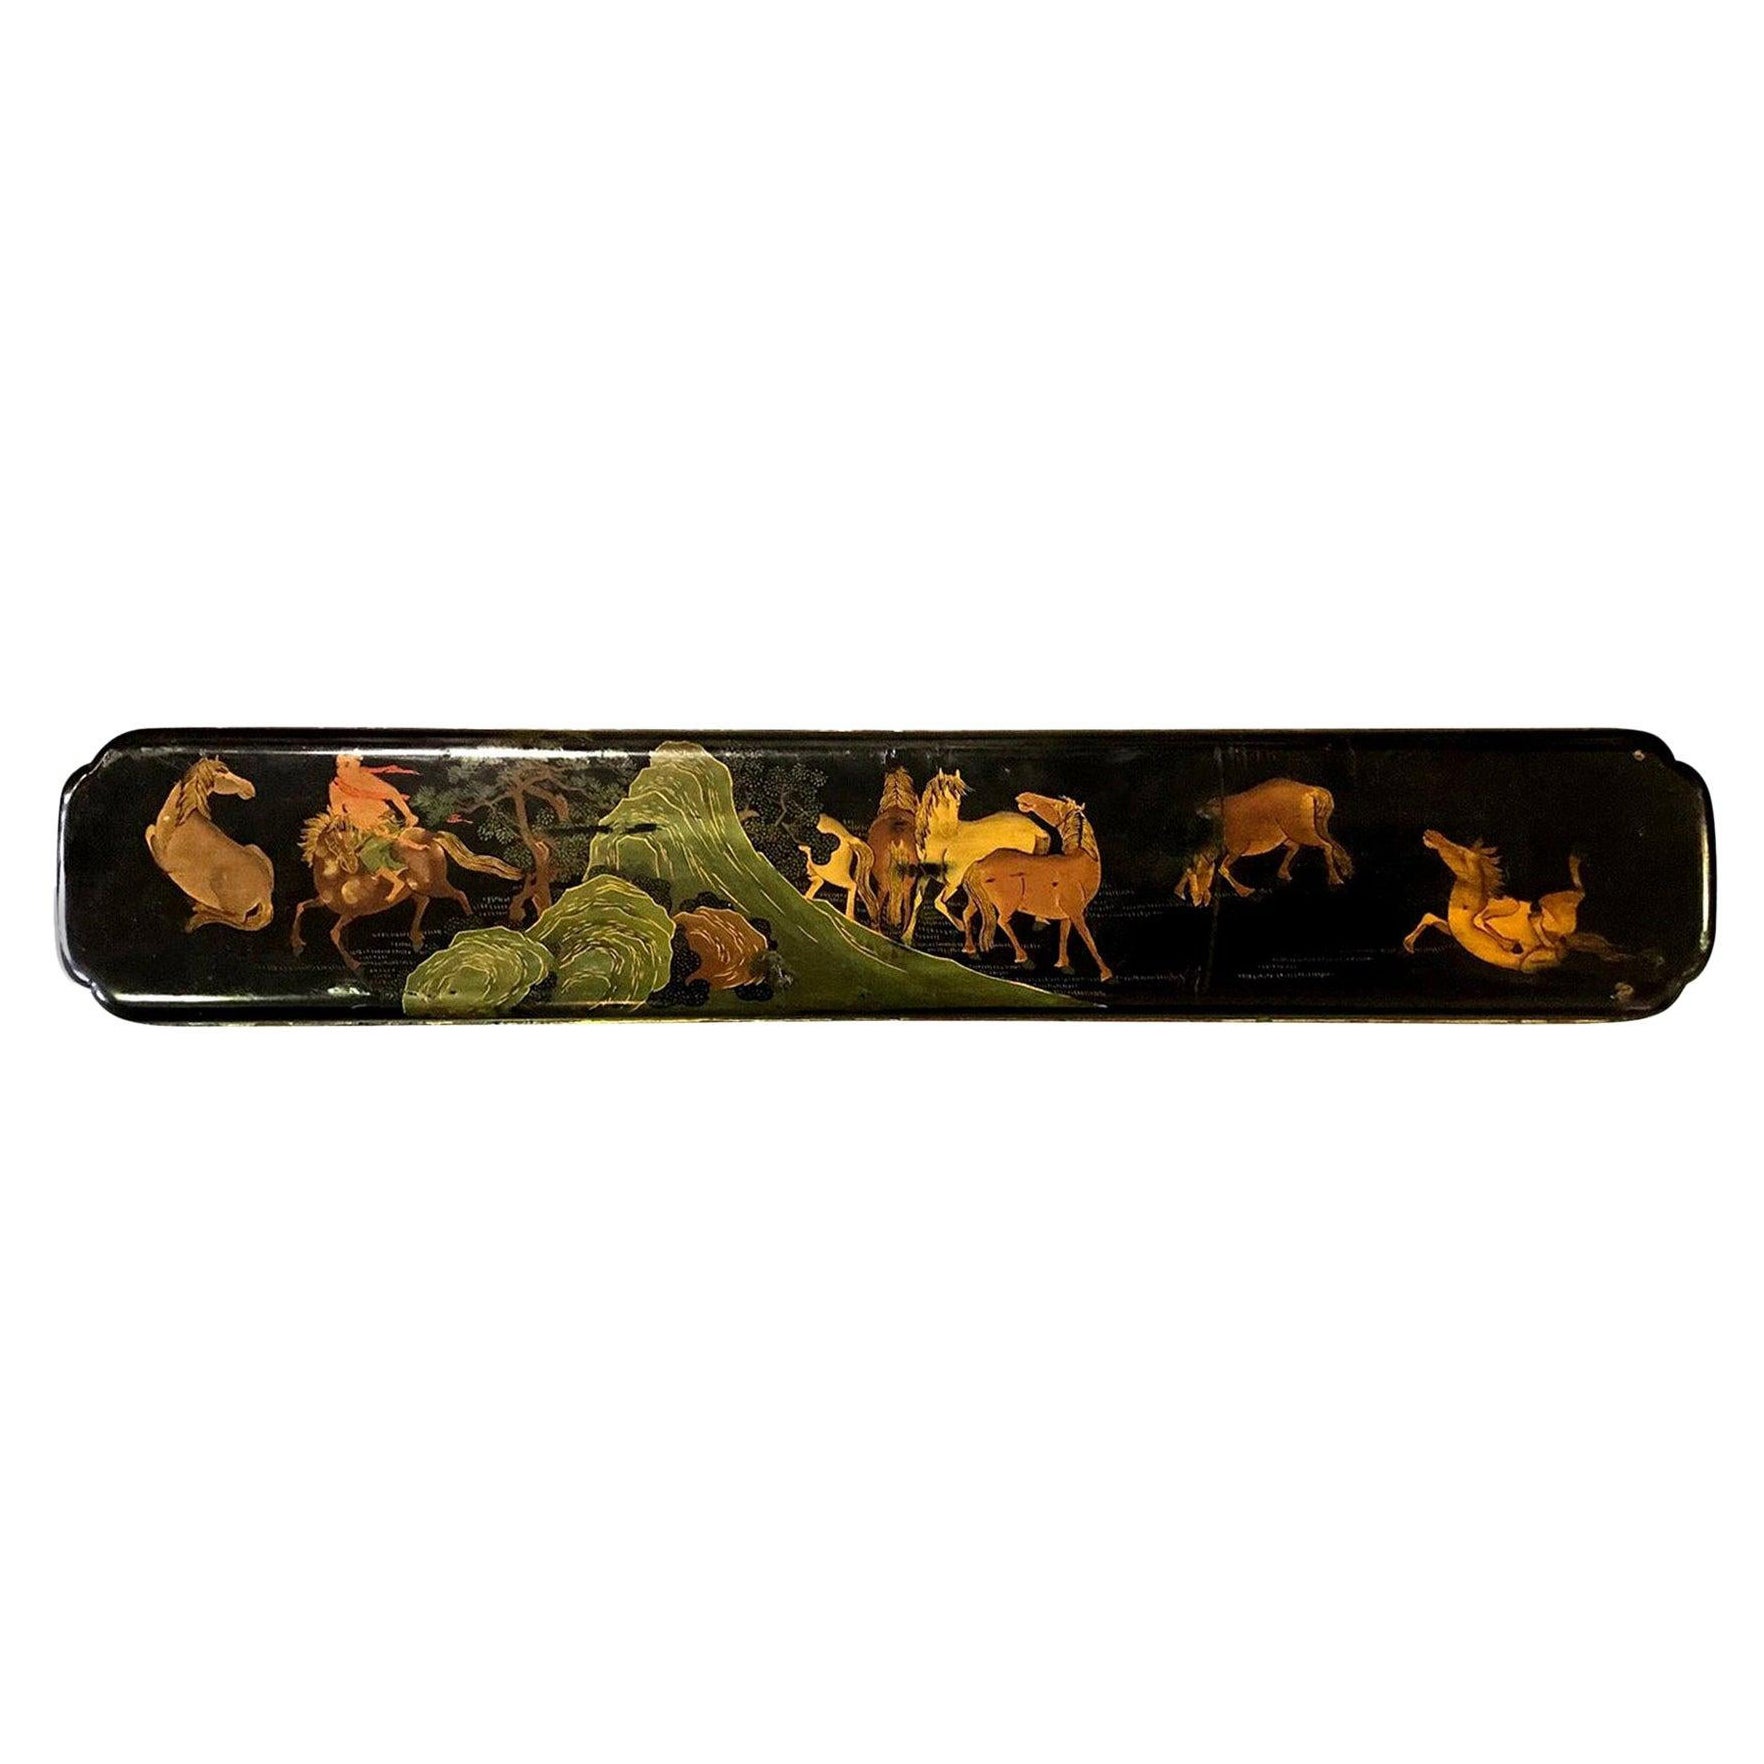 Japanese Hand Painted Lacquered Temple Shrine Plaque of Horses, 19th Century